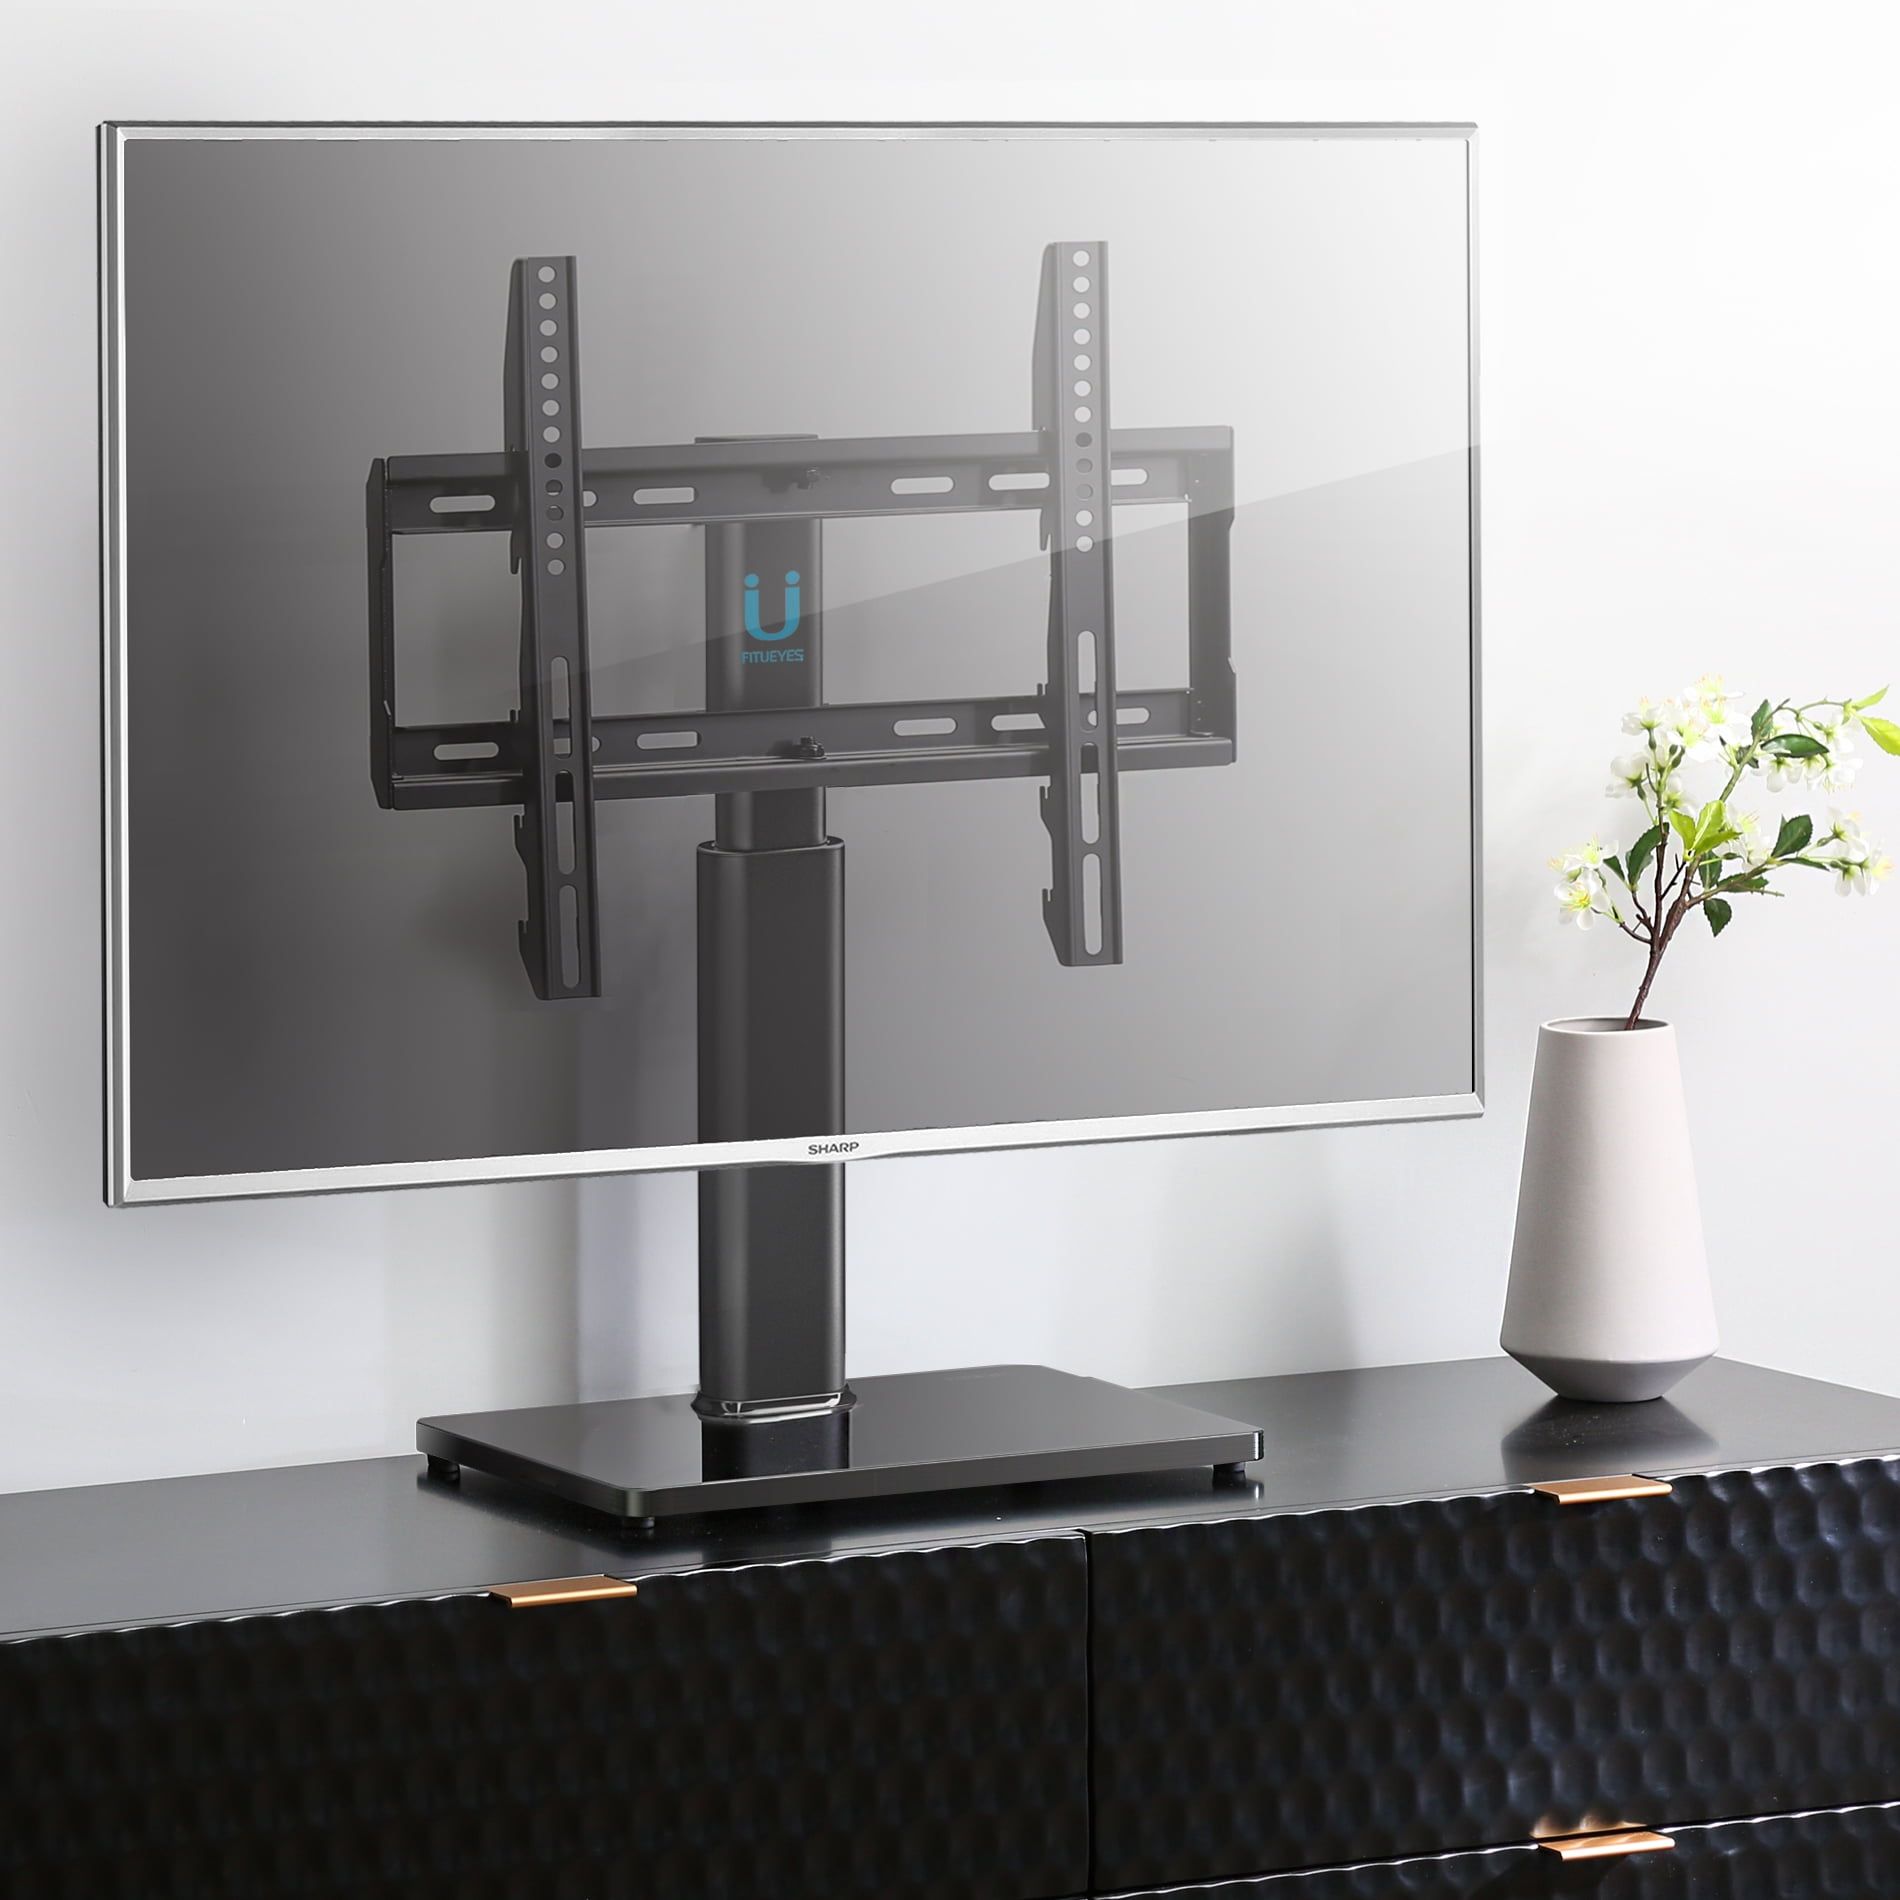 Fitueyes Swivel Tv Stand With Mount For Up To 50 Inch Samsung Vizio Led Throughout Led Tv Stands With Outlet (View 13 of 20)